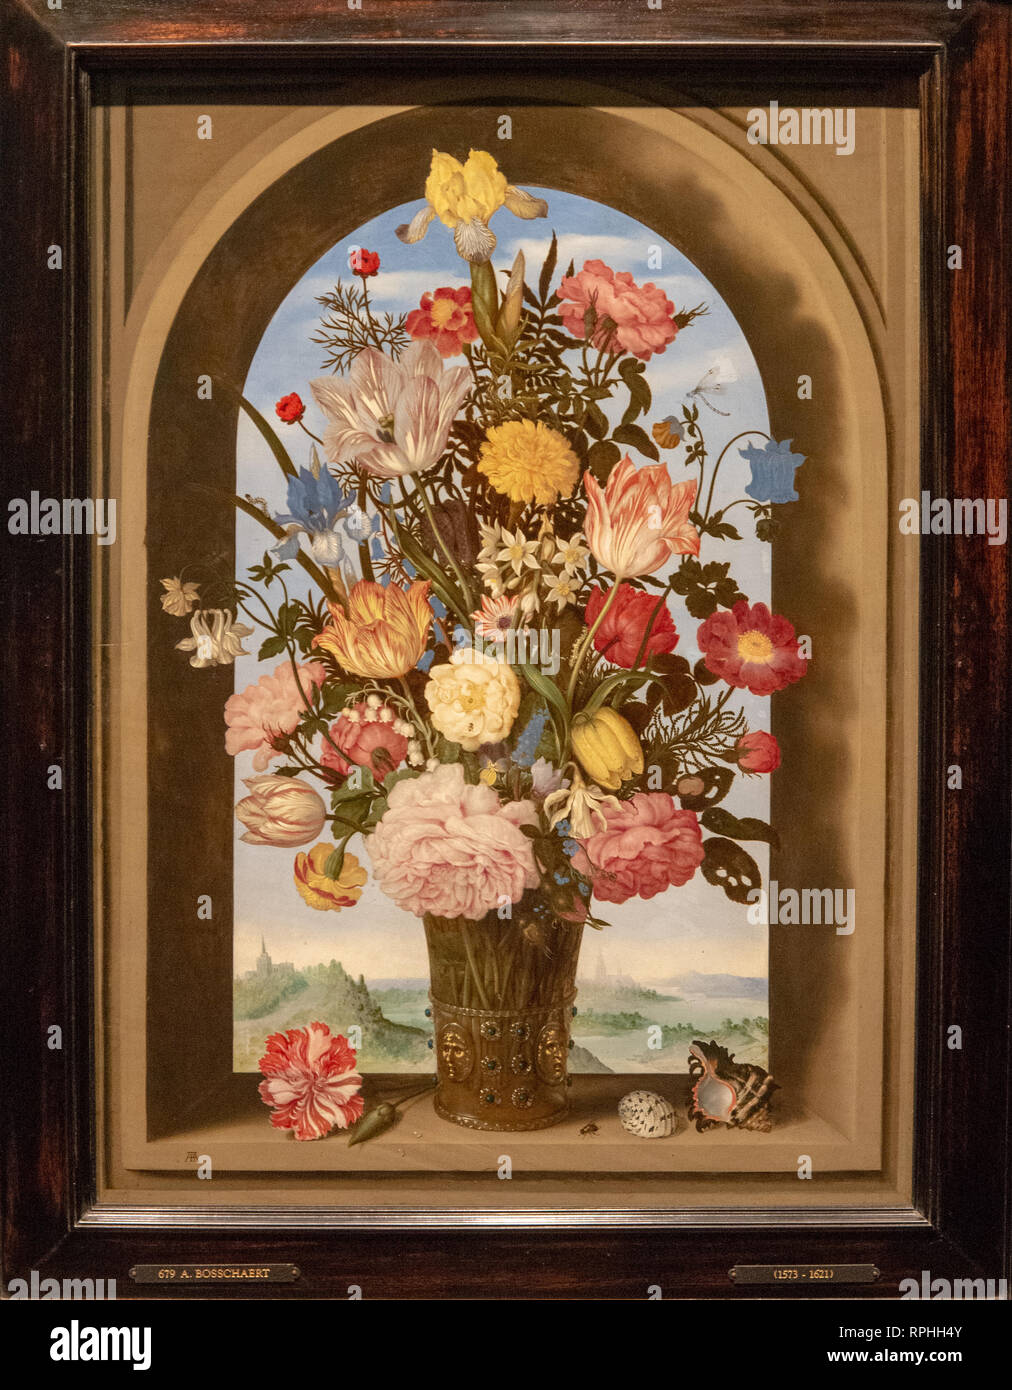 vase of flowers in a window by painter ambrosius bosschaert Stock Photo